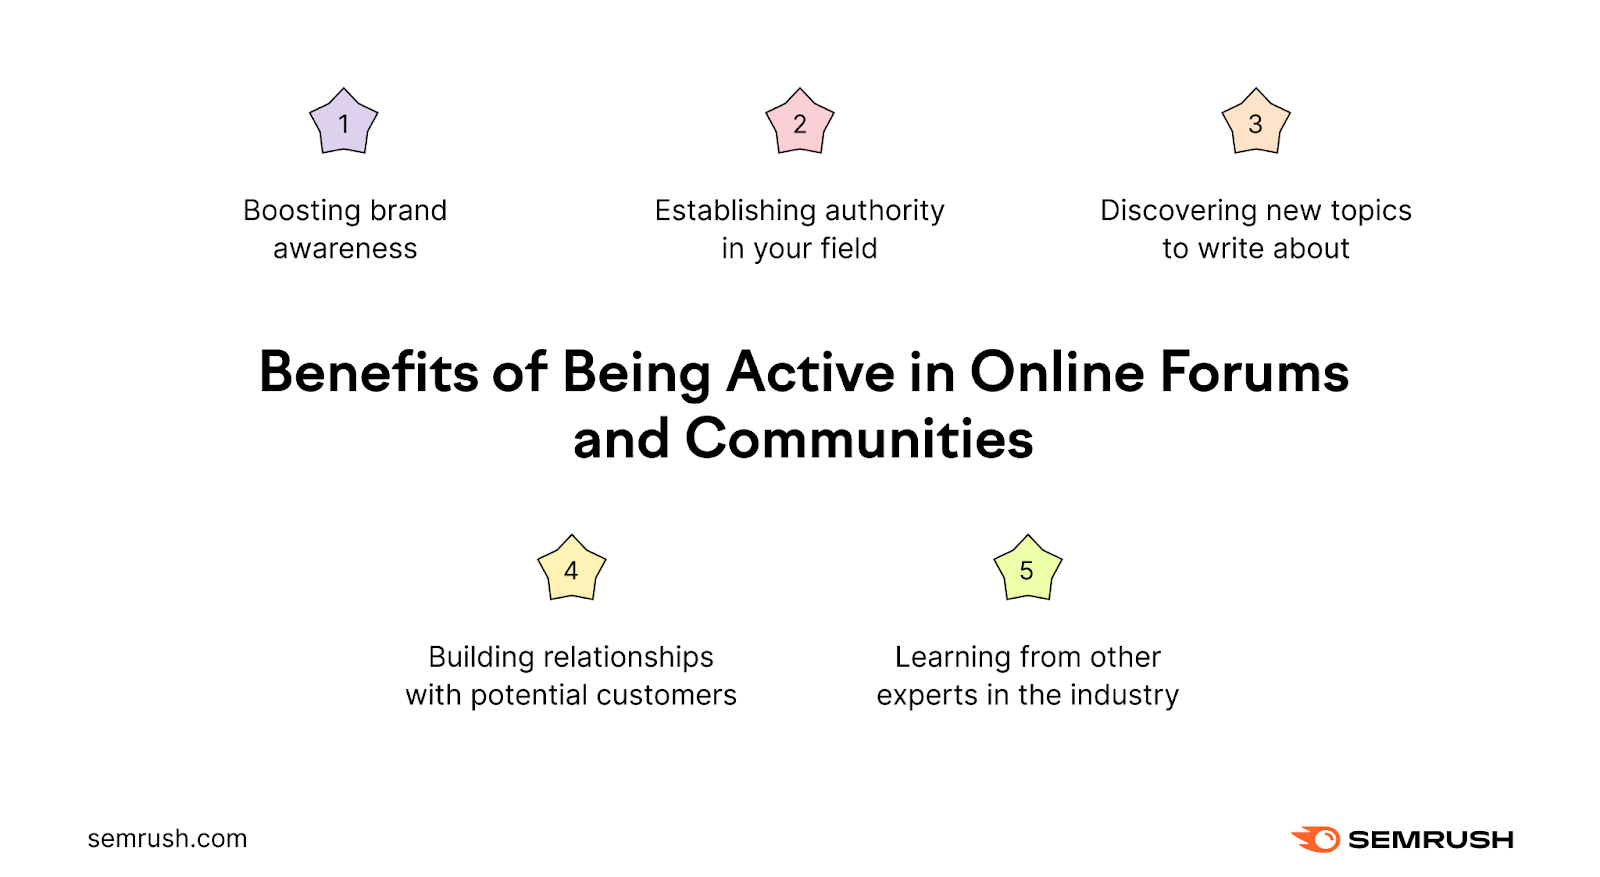 A visual listing the benefits of being active in online forums and communities